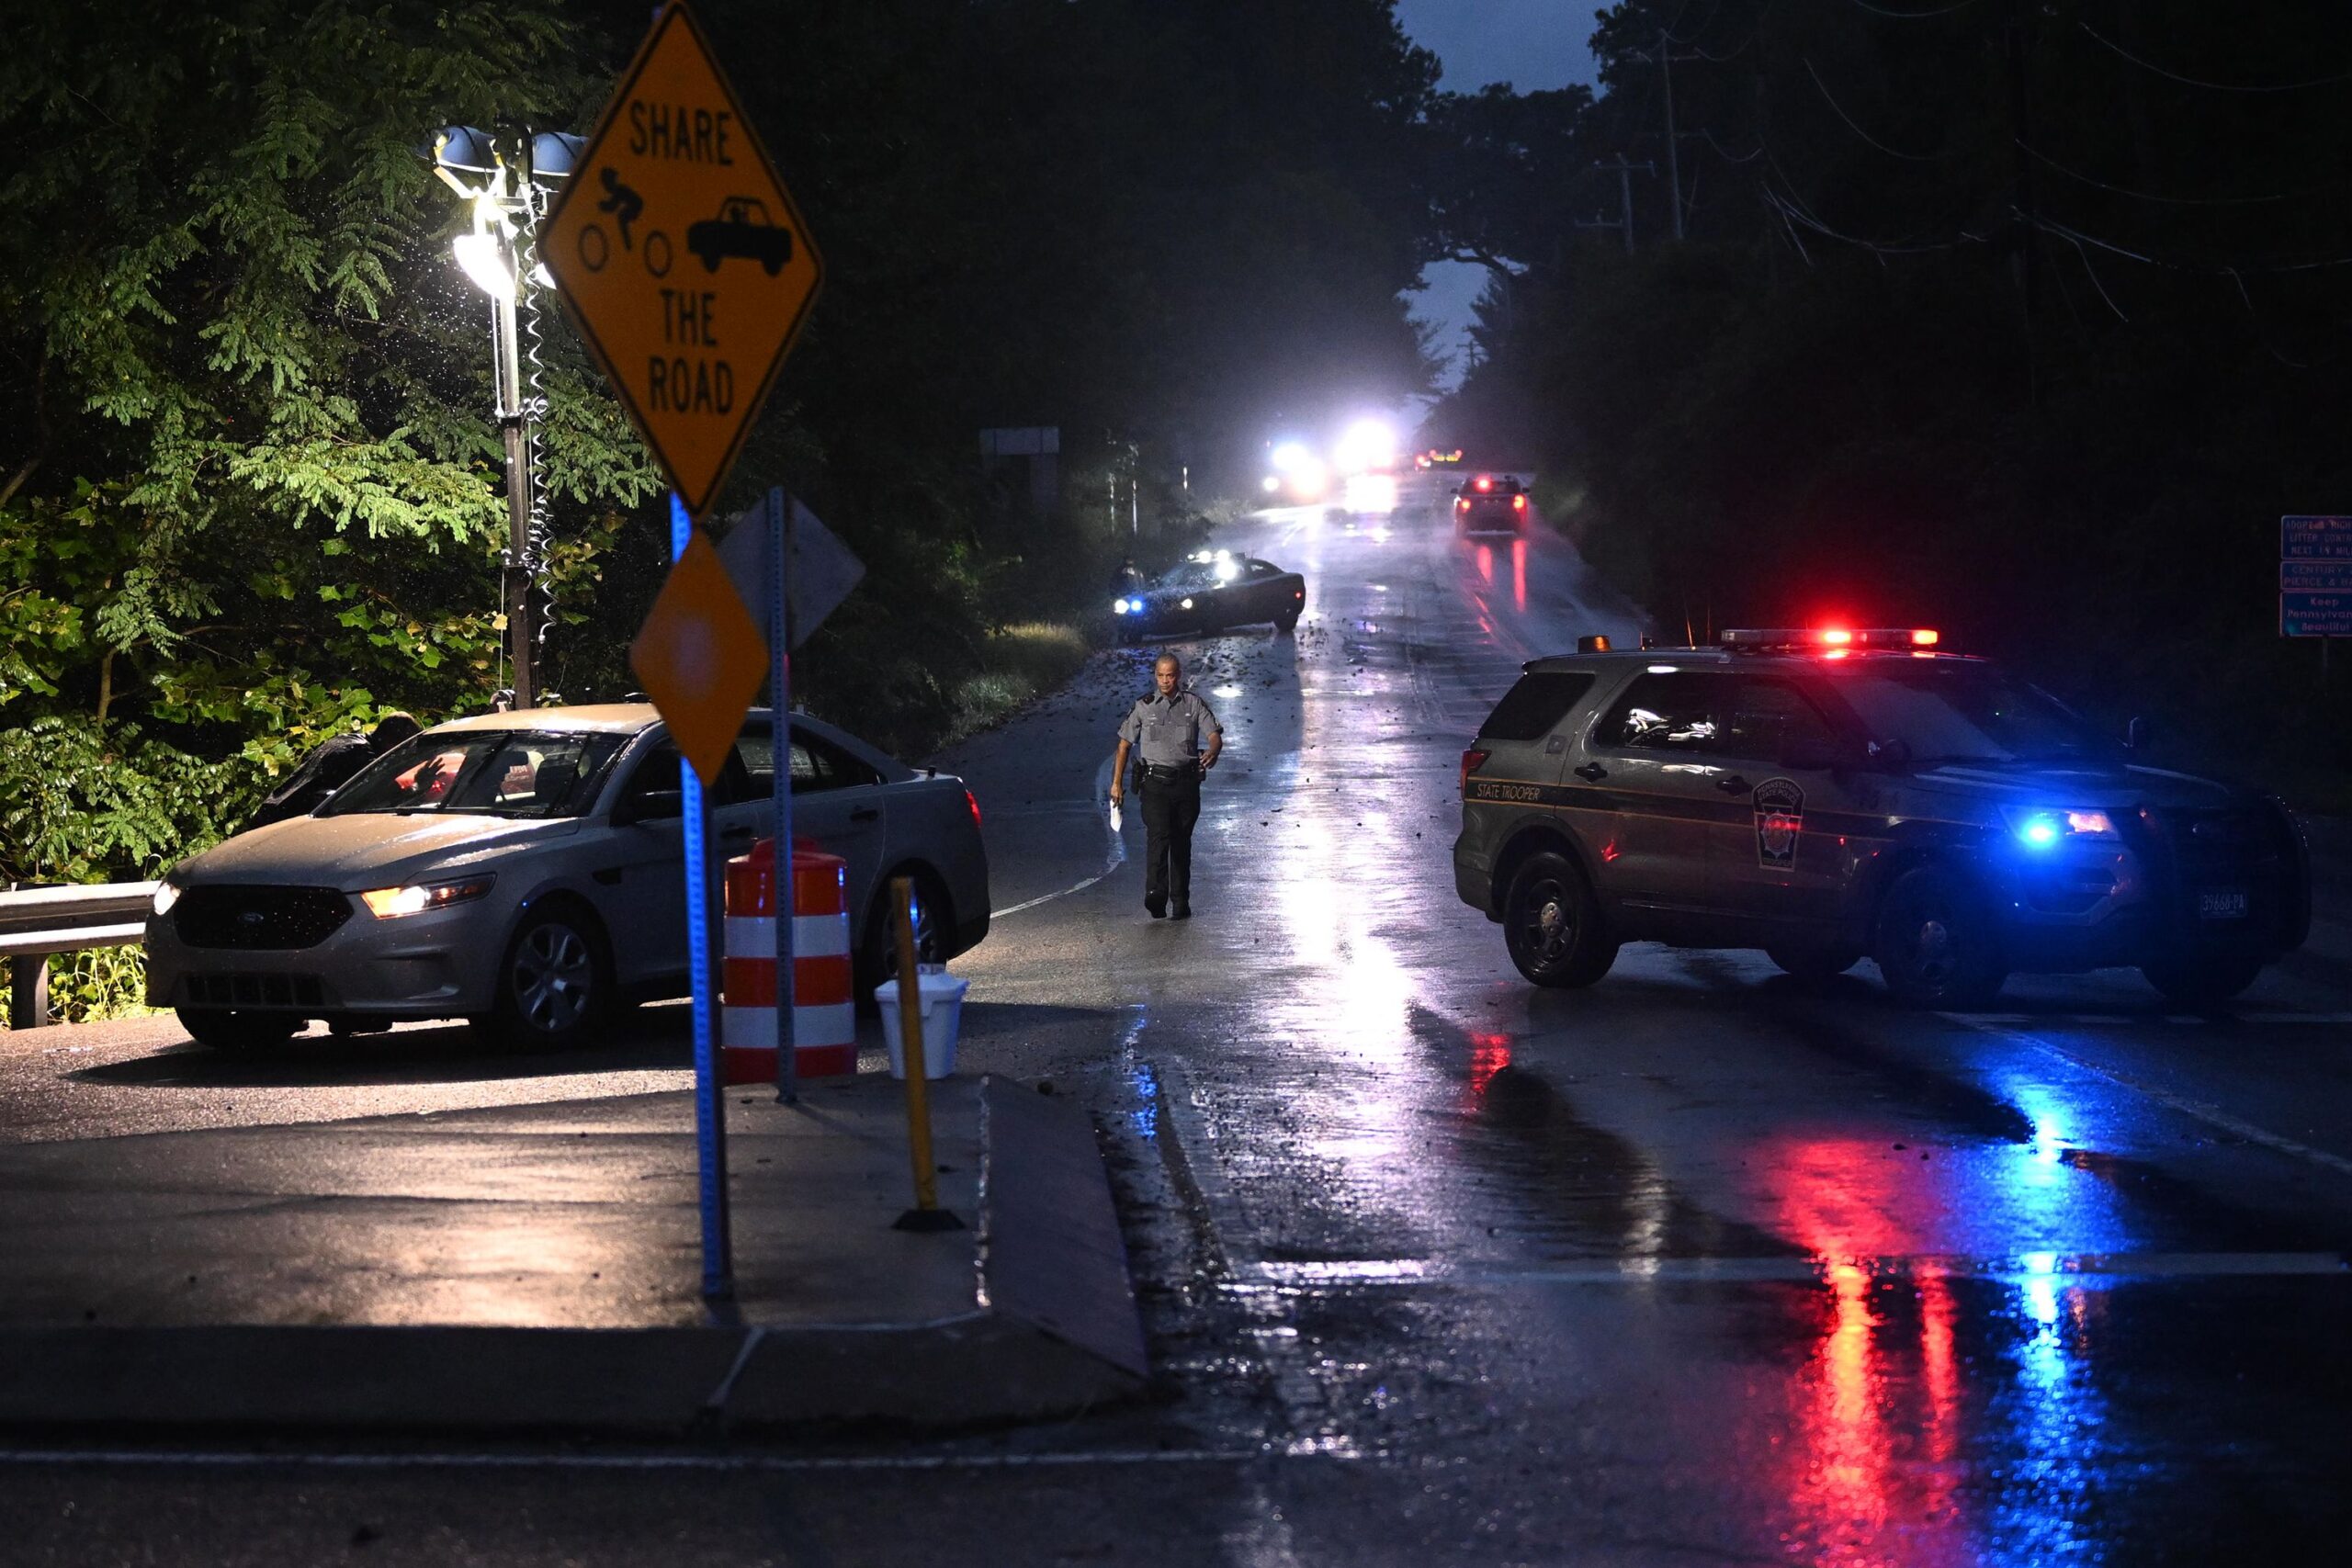 Police monitor a wooded perimeter in the rain during a manhunt for convicted murderer Danelo Cavalc...